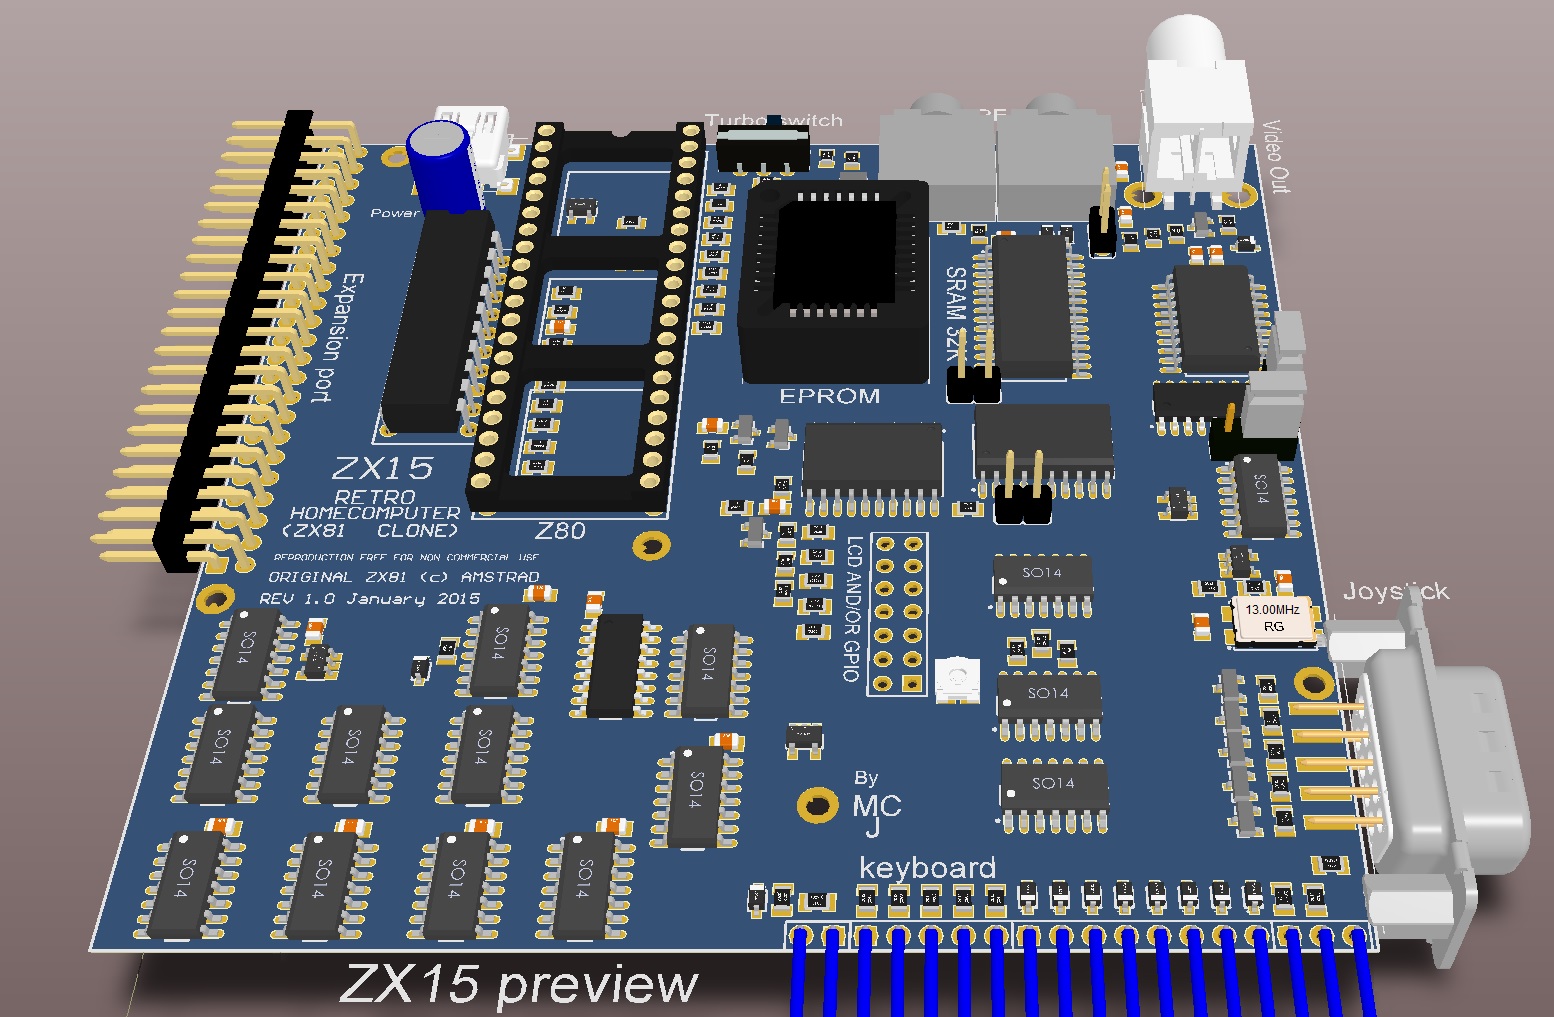 ZX15 preview 15 january 2015.jpg